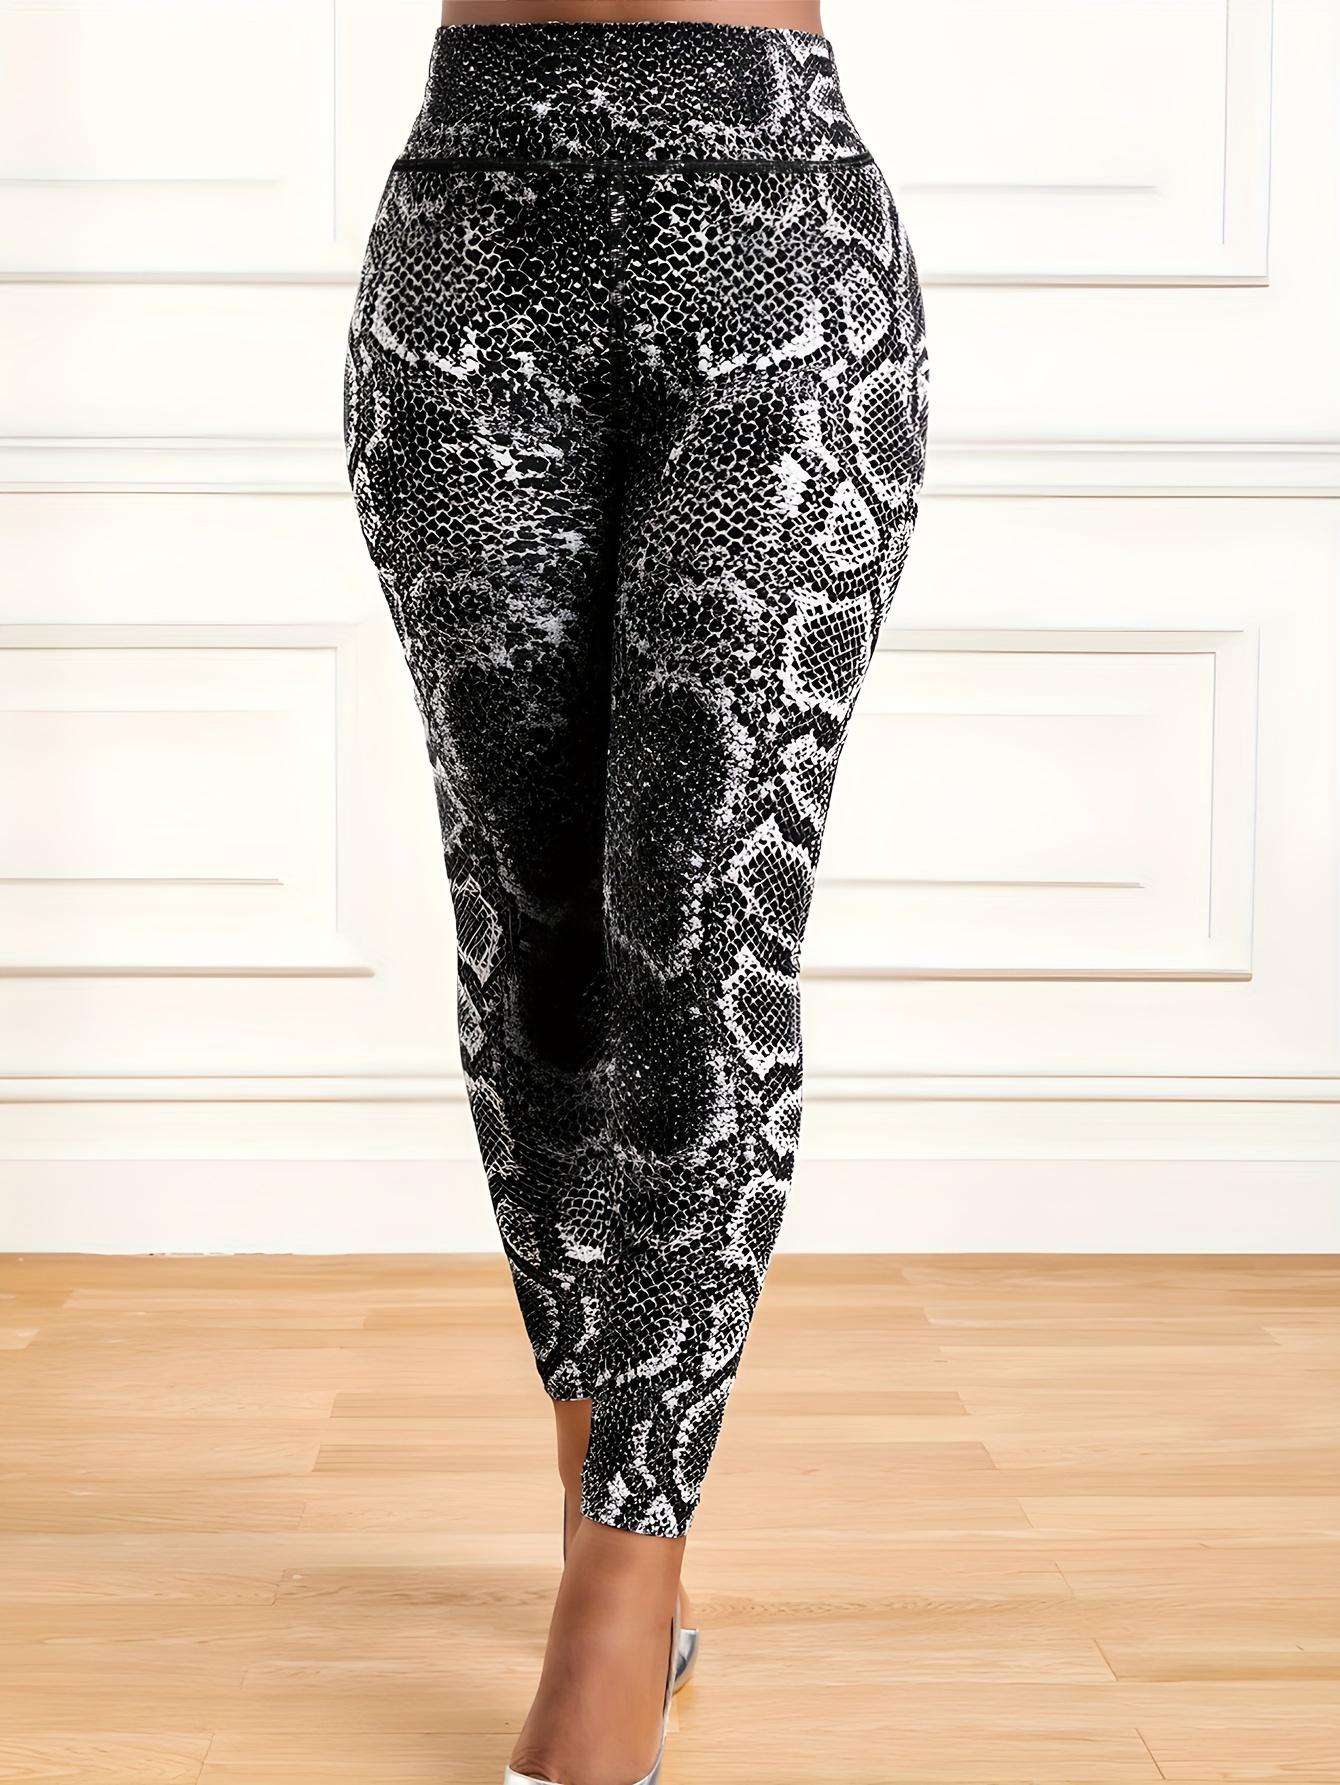 Women Red Snake Printed Leggins New Gothic Workout Leggings Sexy